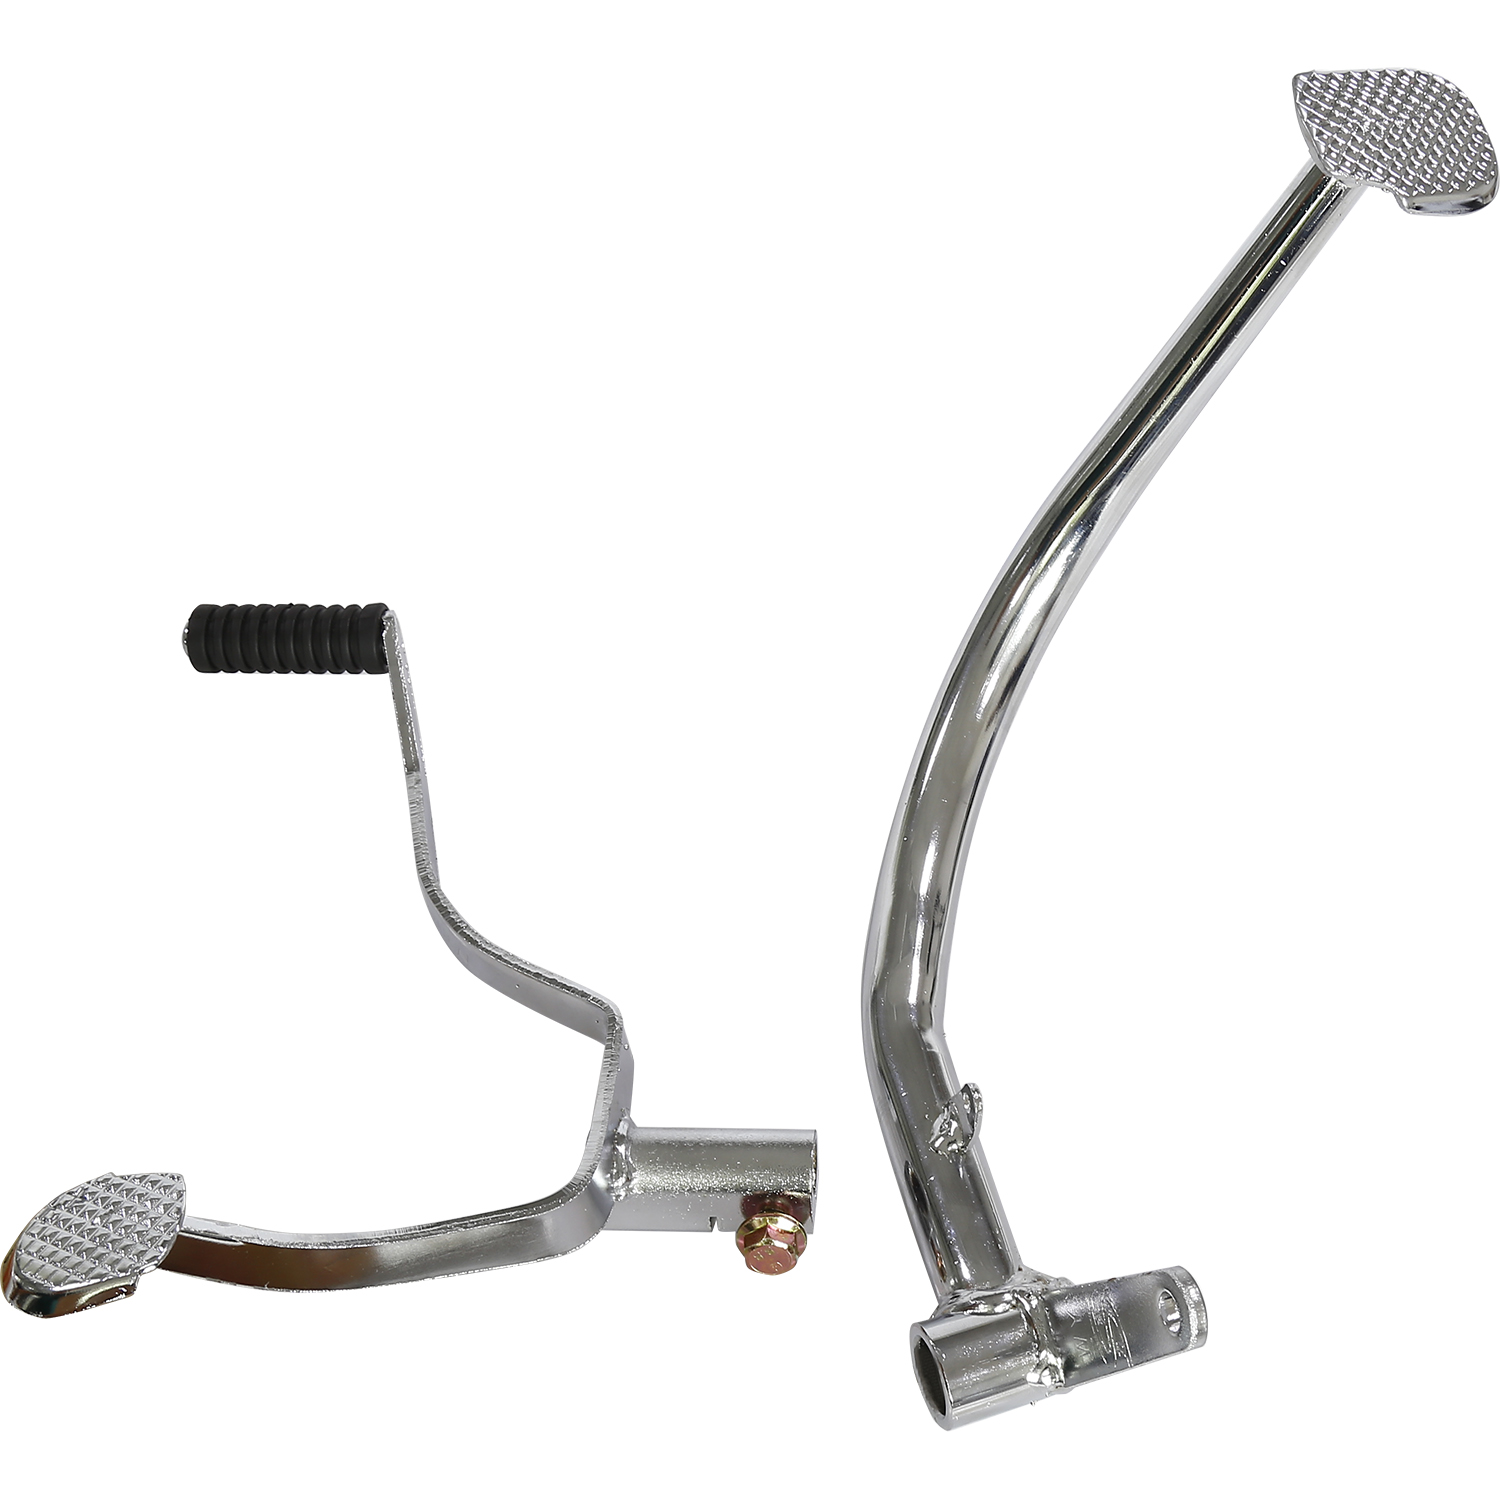 motorcycl gear shift lever